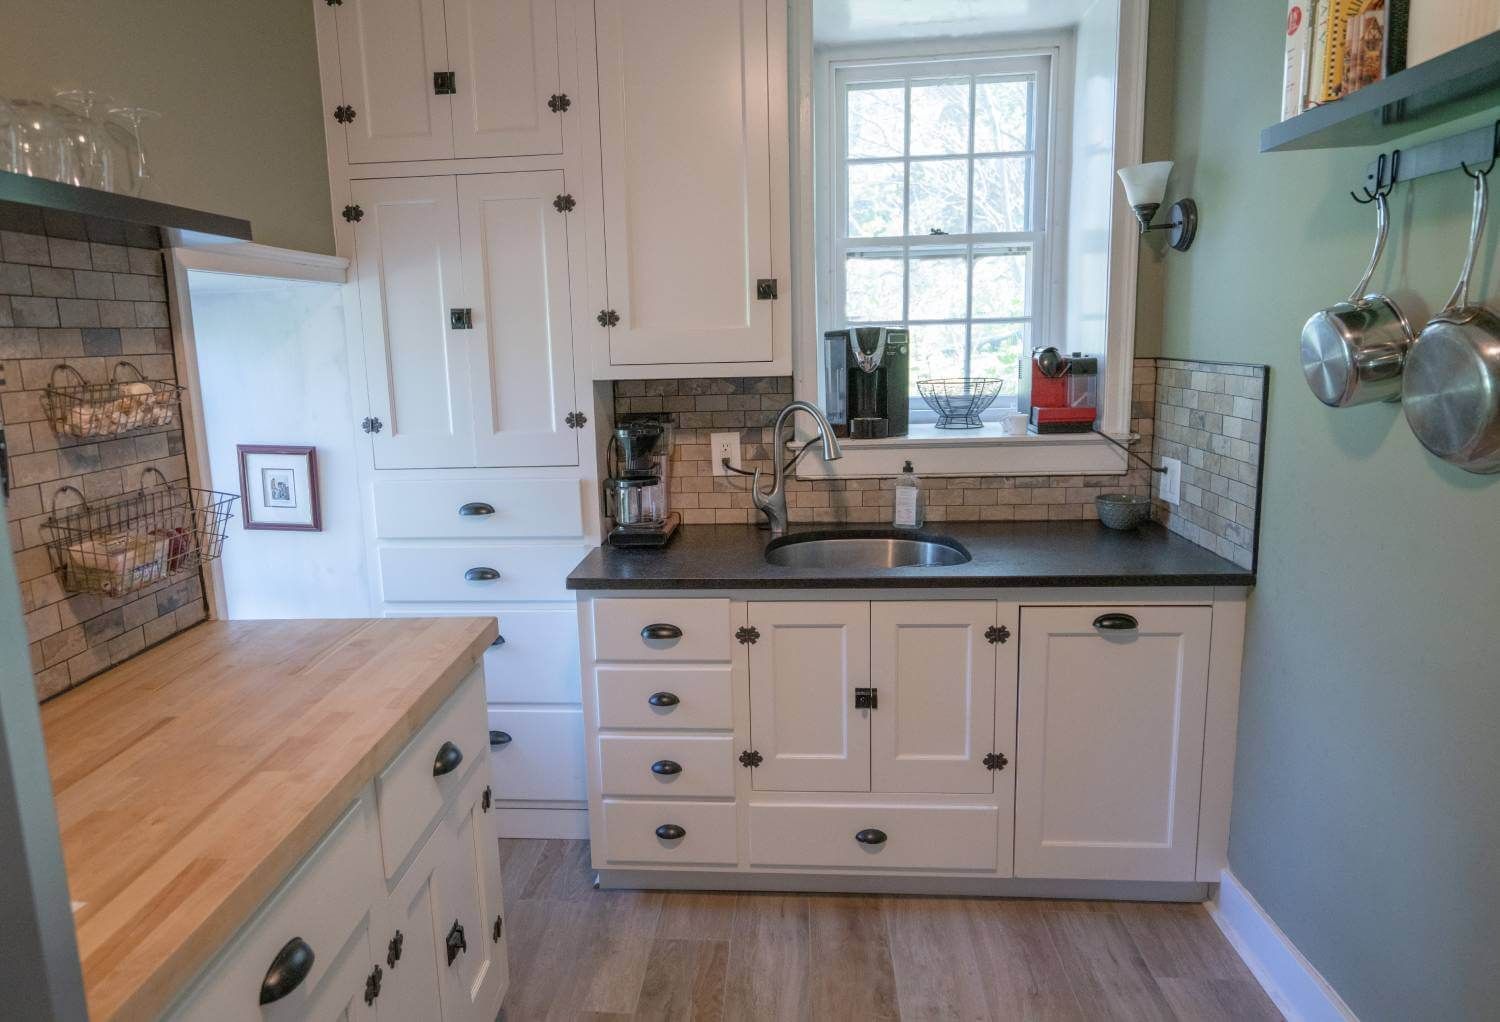 A kitchen with white cabinets, wooden counter tops, a sink and a window